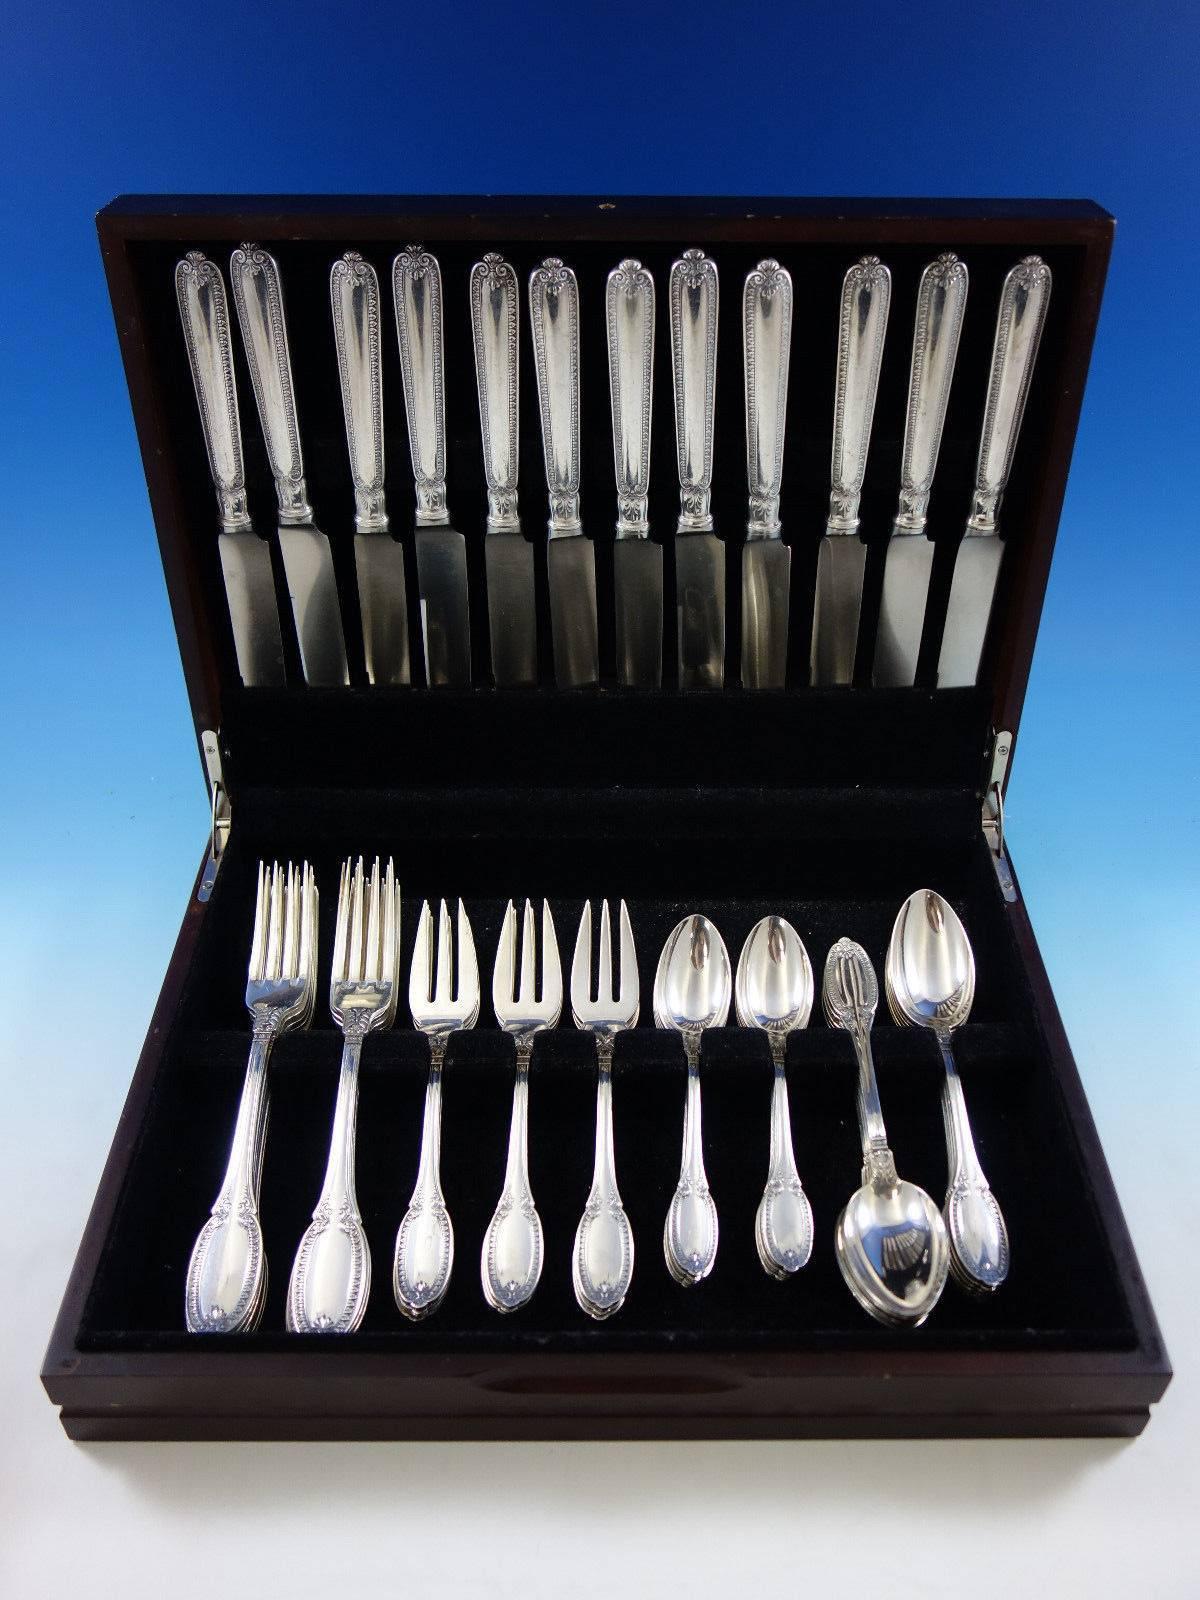 This 60-piece sterling silver Empire by Buccellati set includes: 12 dinner size knives, 9 7/8